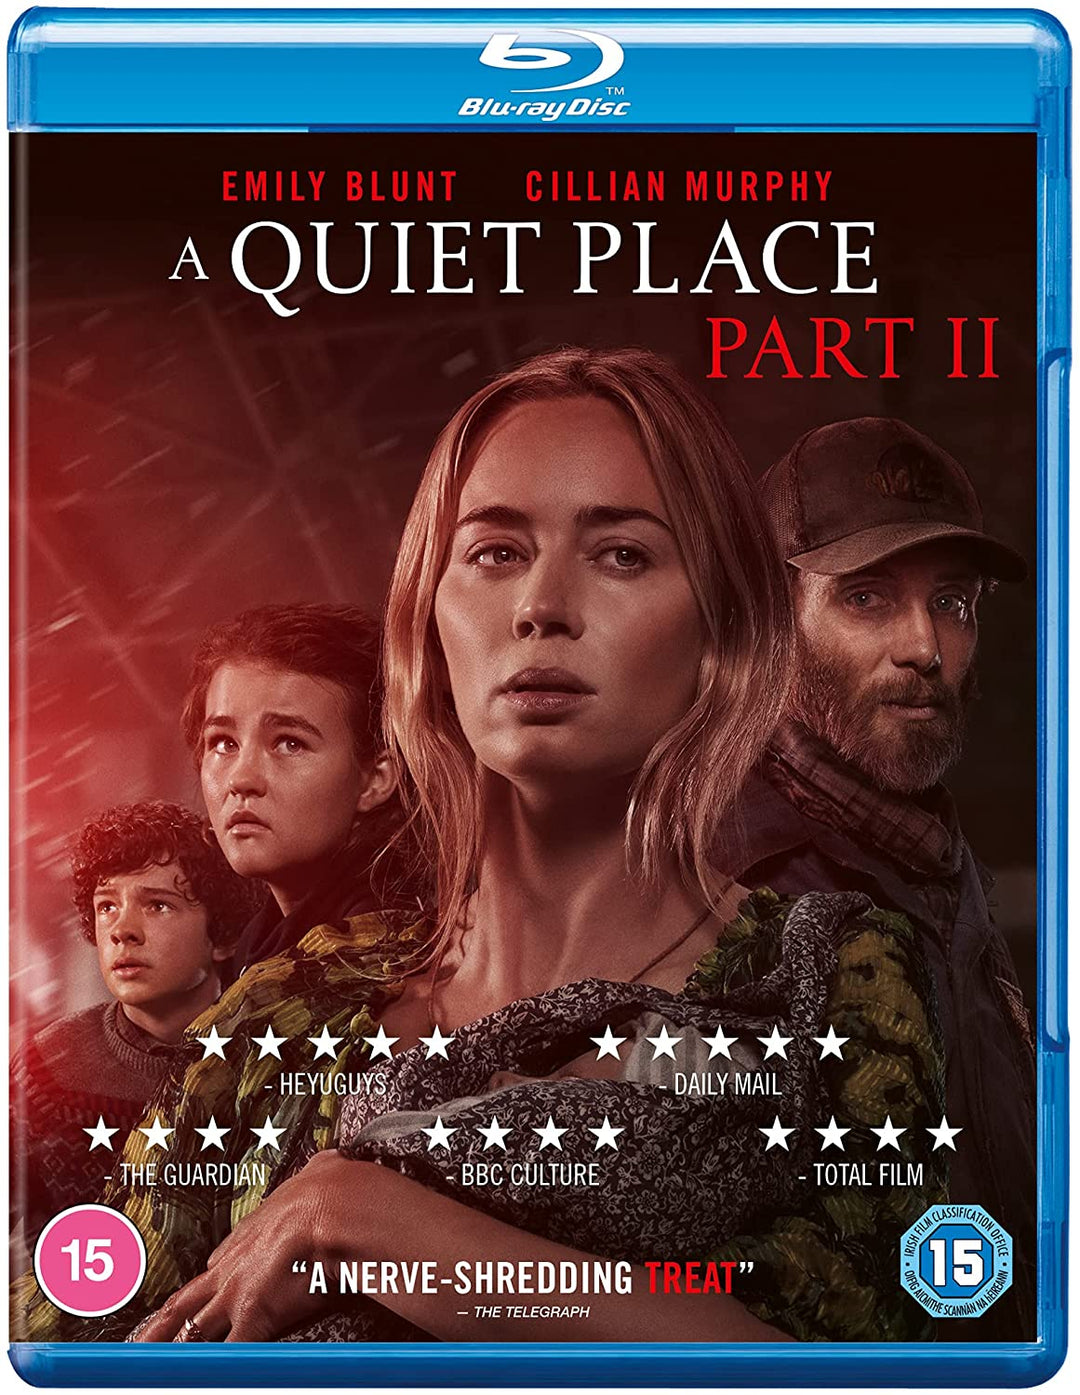 A Quiet Place Part II - Horror/Sci-fi [Blu-ray]